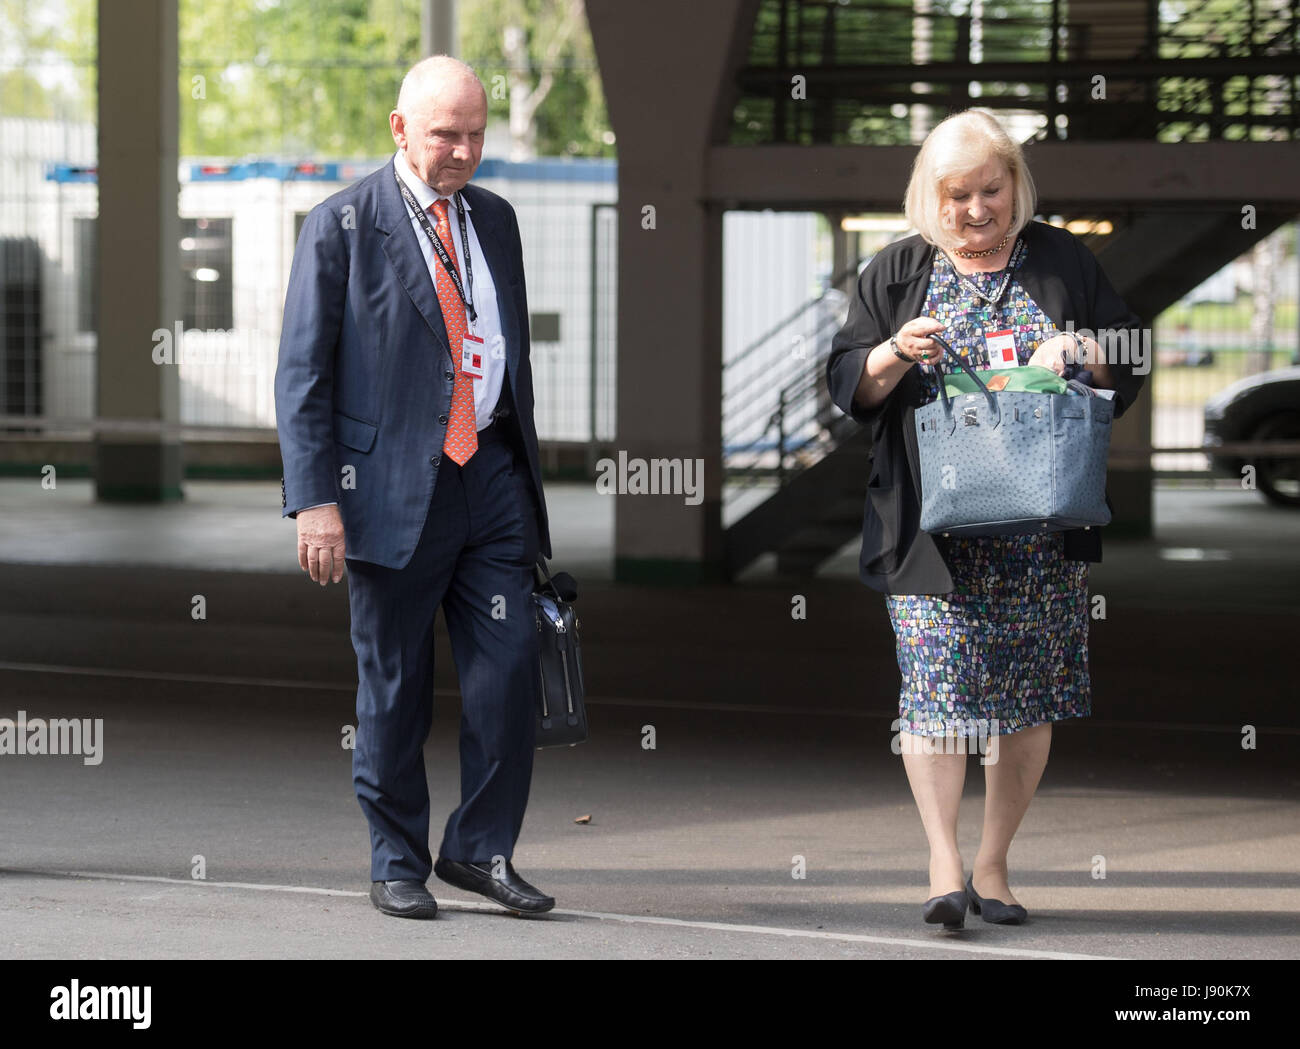 Stuttgart, Germany. 30th May, 2017. Member of the Supervisory Board of Porsche SE, Ferdinand Piech, and his wife Ursula walk towards their car in a parking lot after the company's general annual meeting in Stuttgart, Germany, 30 May 2017. Photo: Marijan Murat/dpa/Alamy Live News Stock Photo